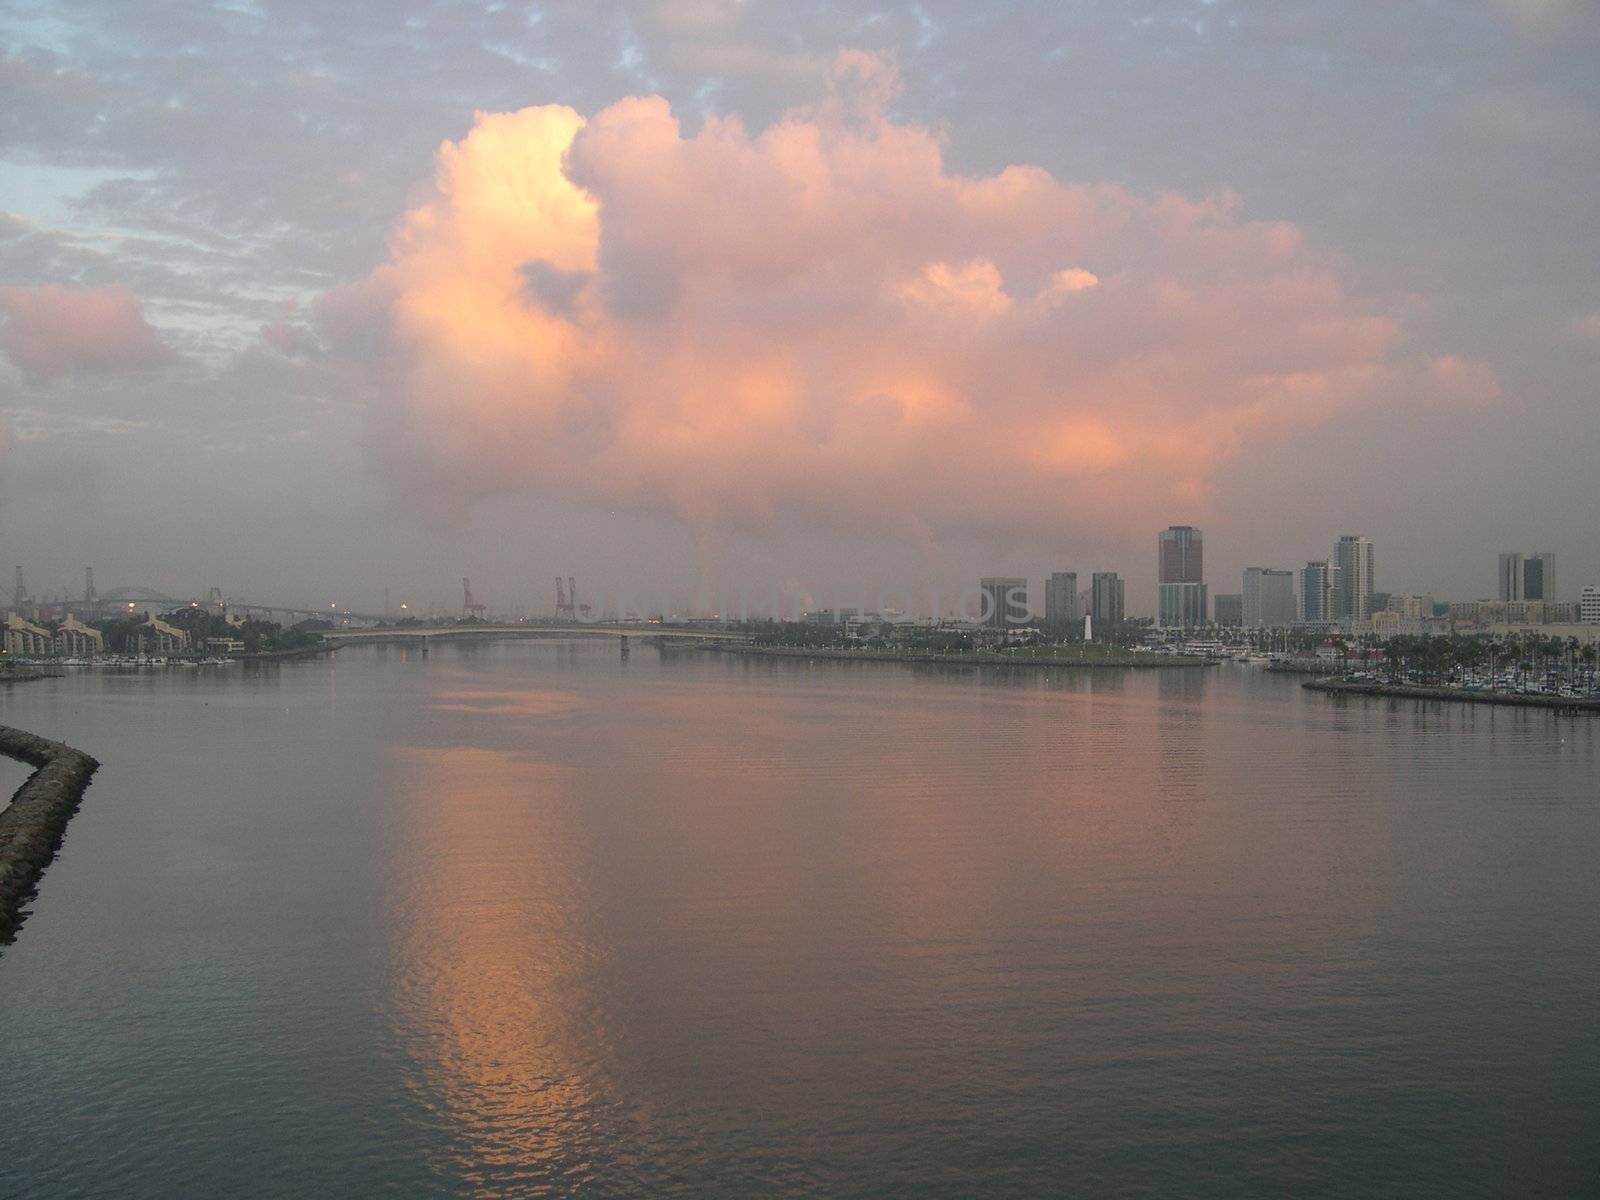 a cloud at sunset, also the reflection in the water, in a harbor